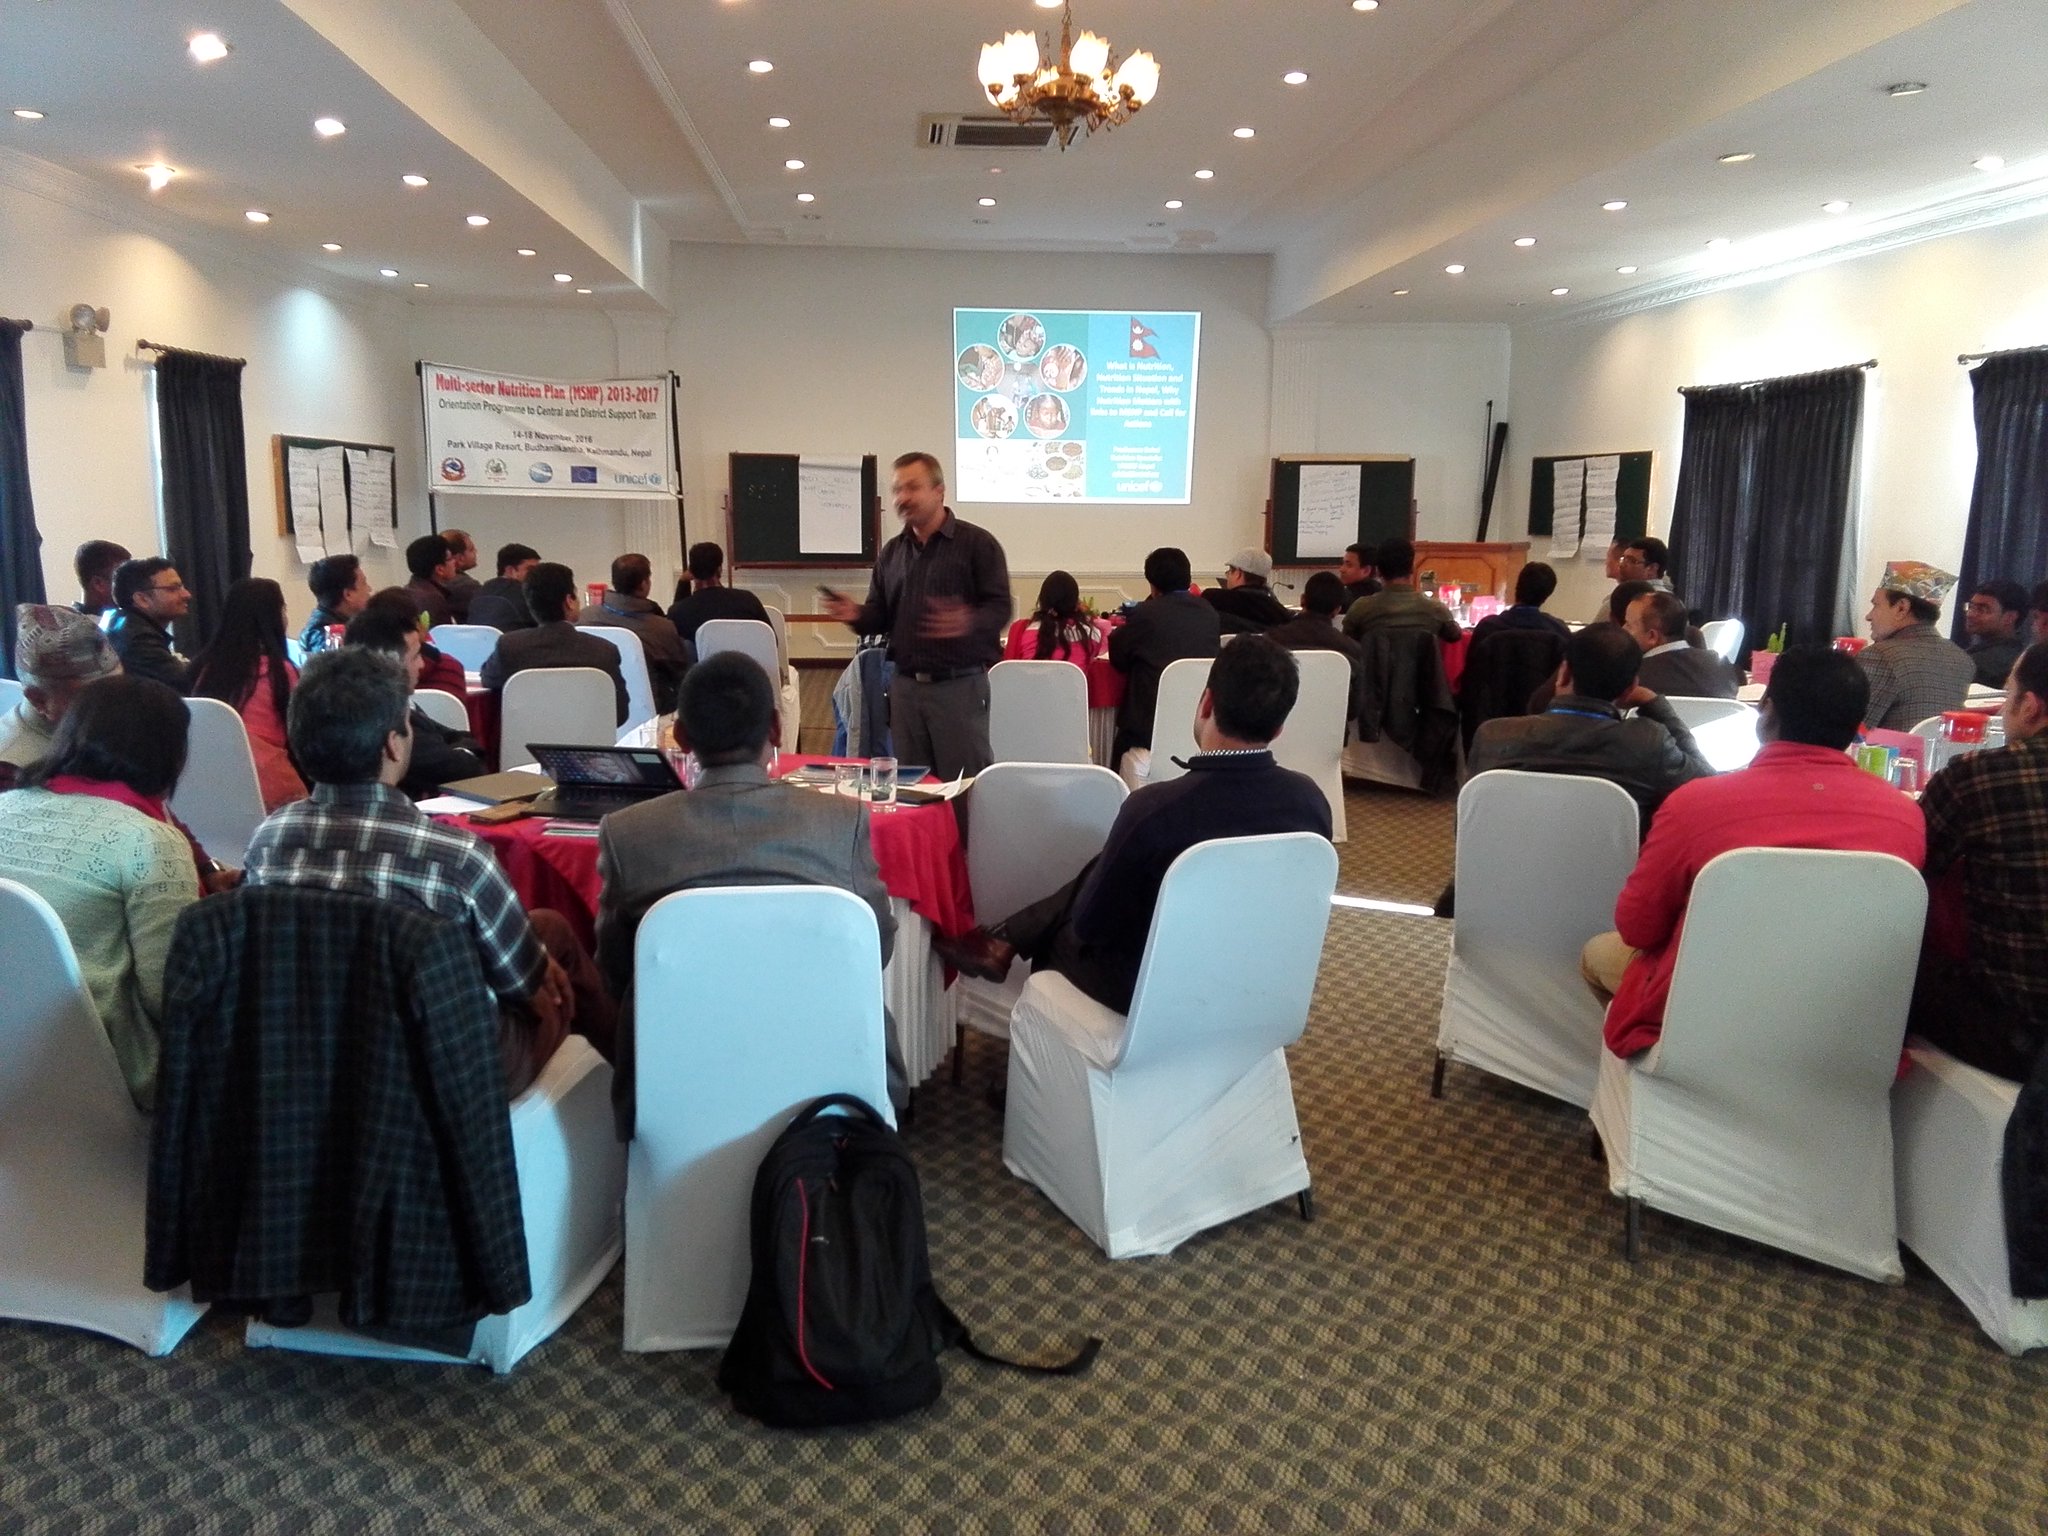 Sub-national orientation and campaigns are helping to scale up nutrition in Nepal